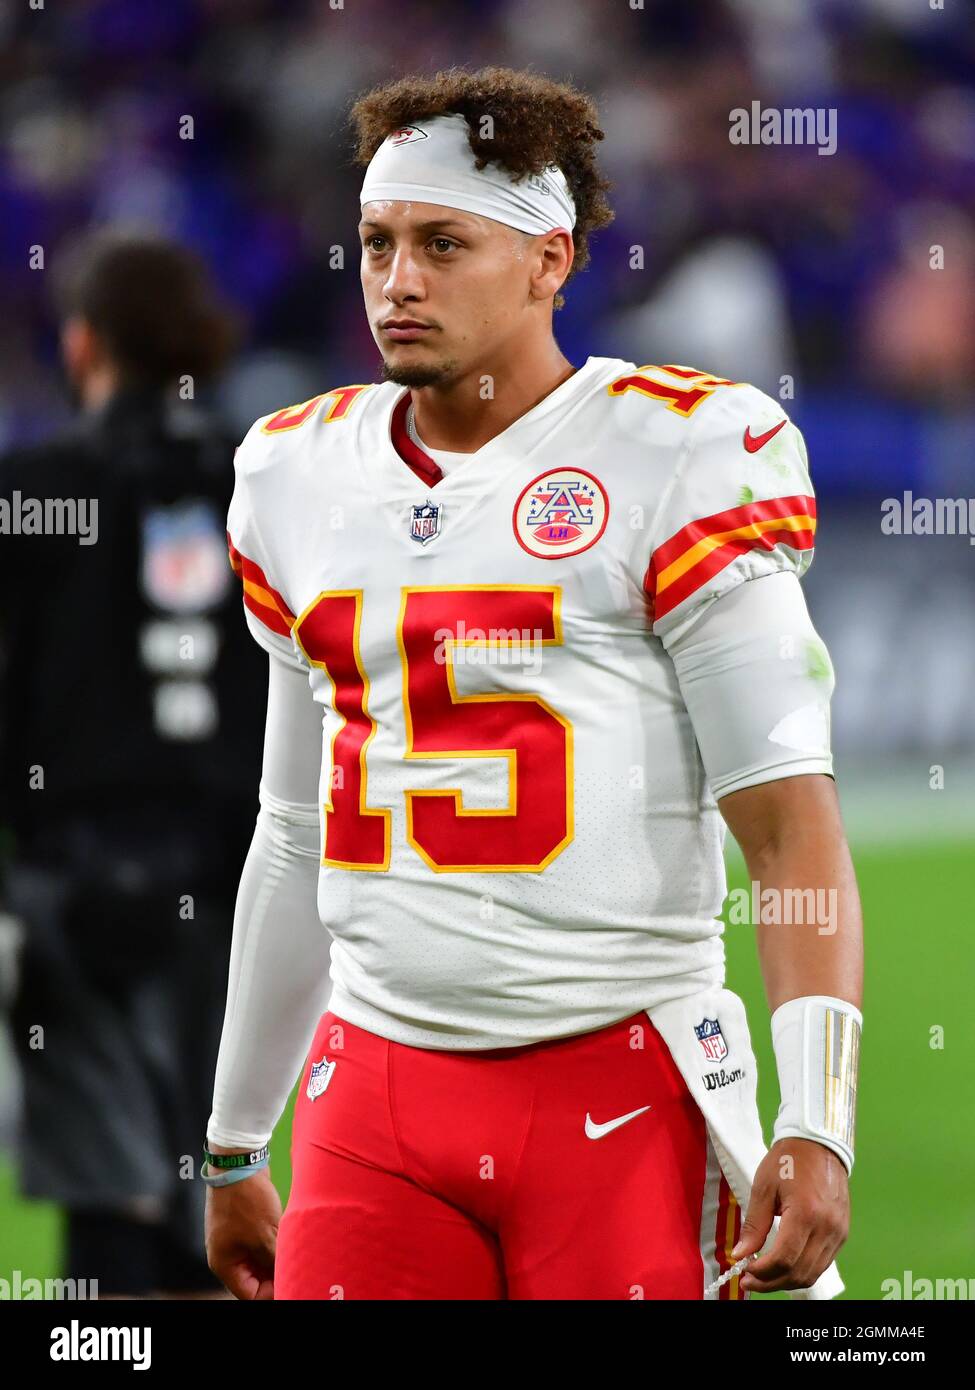 Baltimore, United States. 19th Sep, 2021. Kansas City Chiefs quarterback Patrick Mahomes (15) leaves the field after a 36-35 defeat by the Baltimore Ravens at M&T Bank Stadium in Baltimore, Maryland, on Sunday, September 19, 2021. Photo by David Tulis/UPI Credit: UPI/Alamy Live News Stock Photo